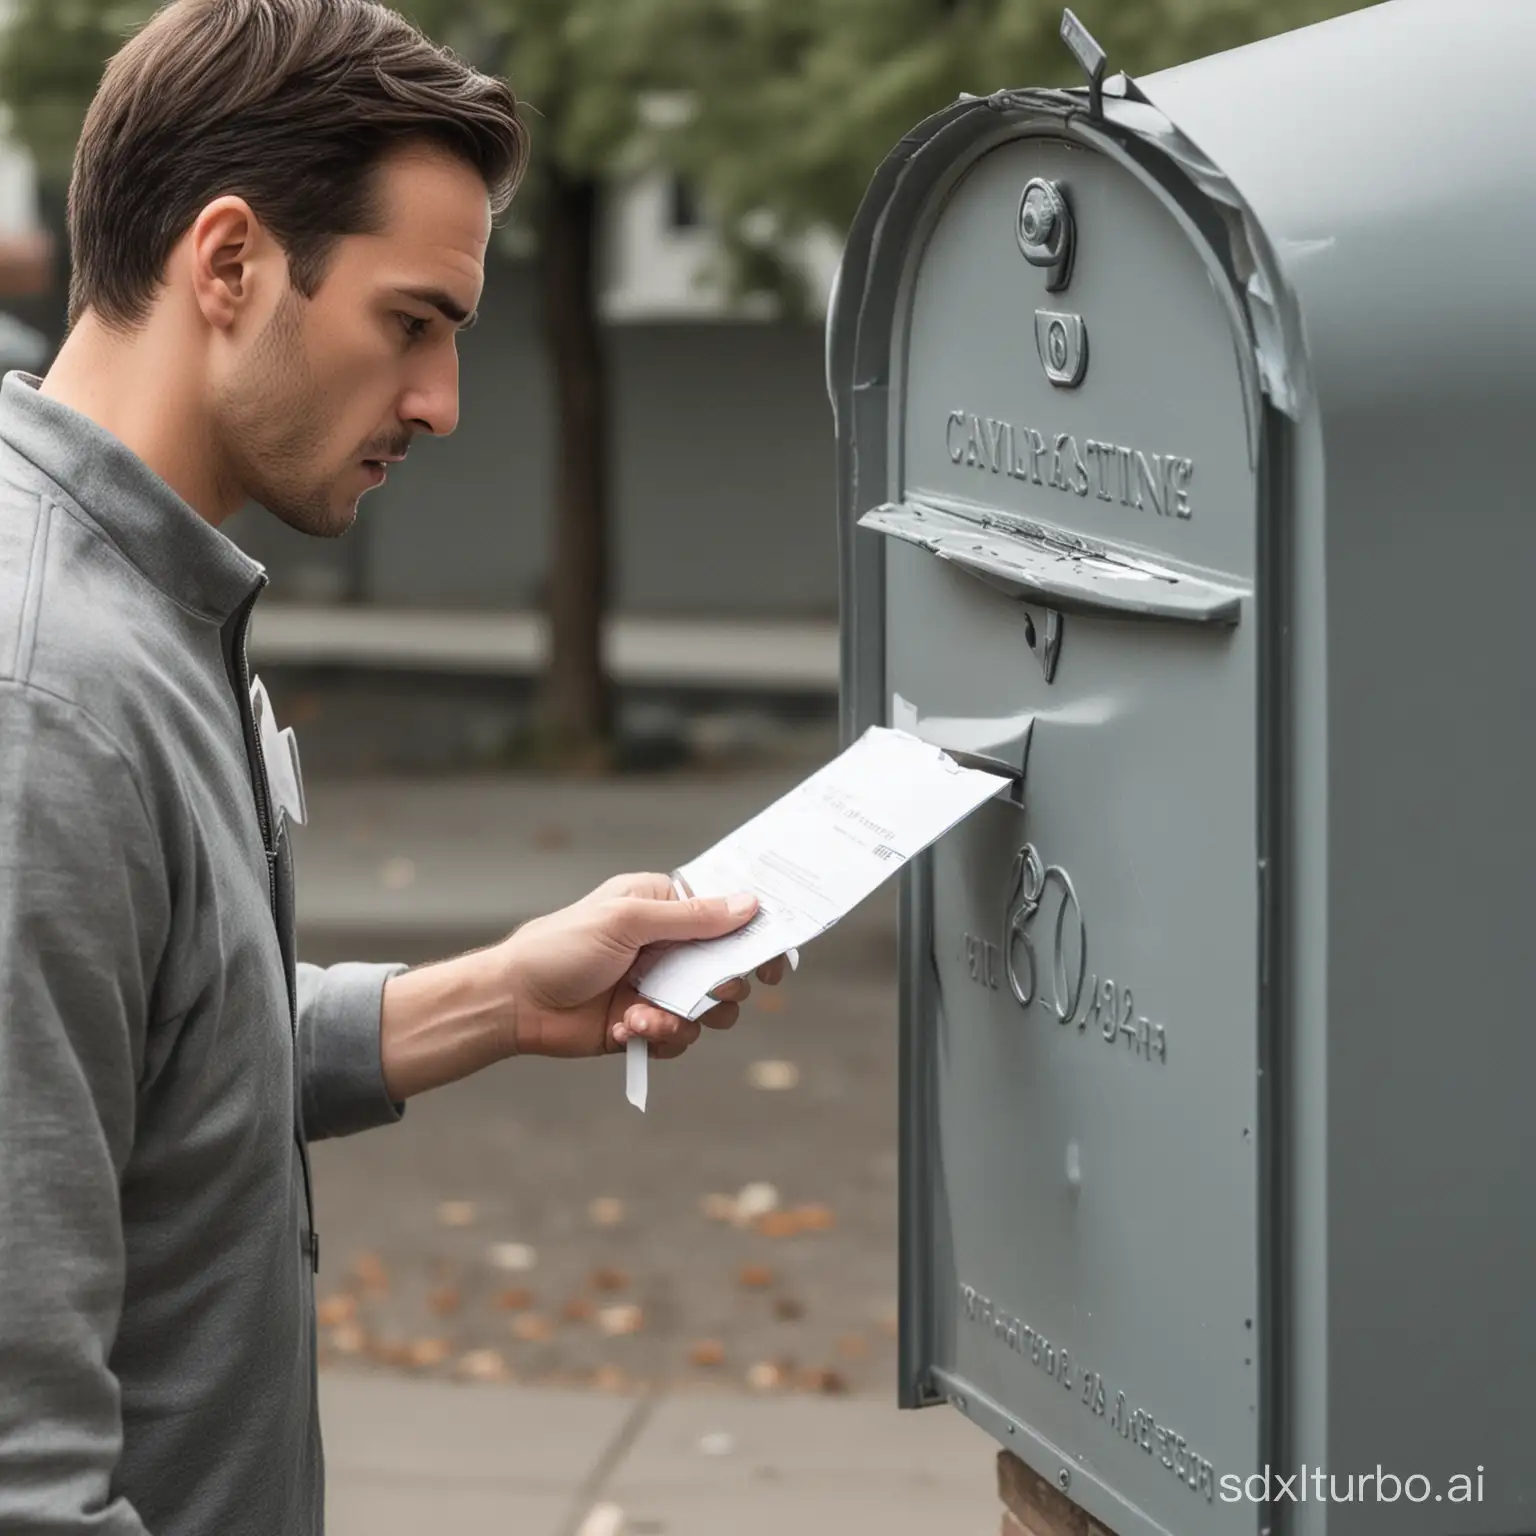 Man-Holding-Envelope-by-Mailbox-with-Erased-Figure